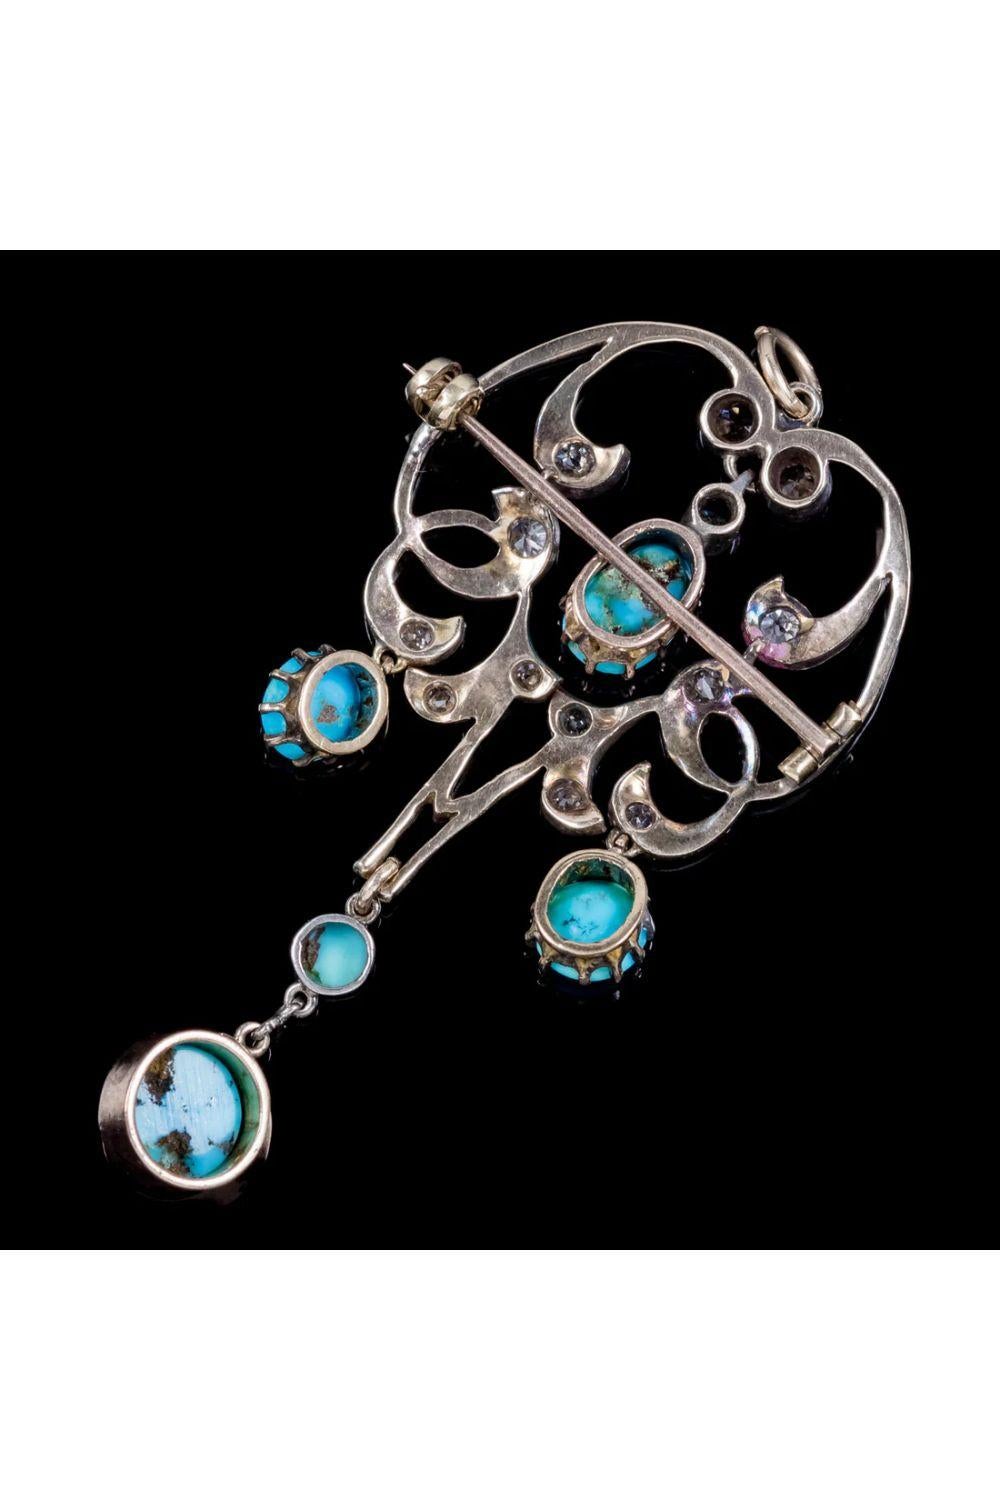 A beautiful antique Art Nouveau pendant from the Edwardian era decorated with glistening old cut diamonds and five natural turquoise droppers.

The largest turquoise is approx. 2ct and hangs from a swinging pendulum at the bottom. The diamonds are